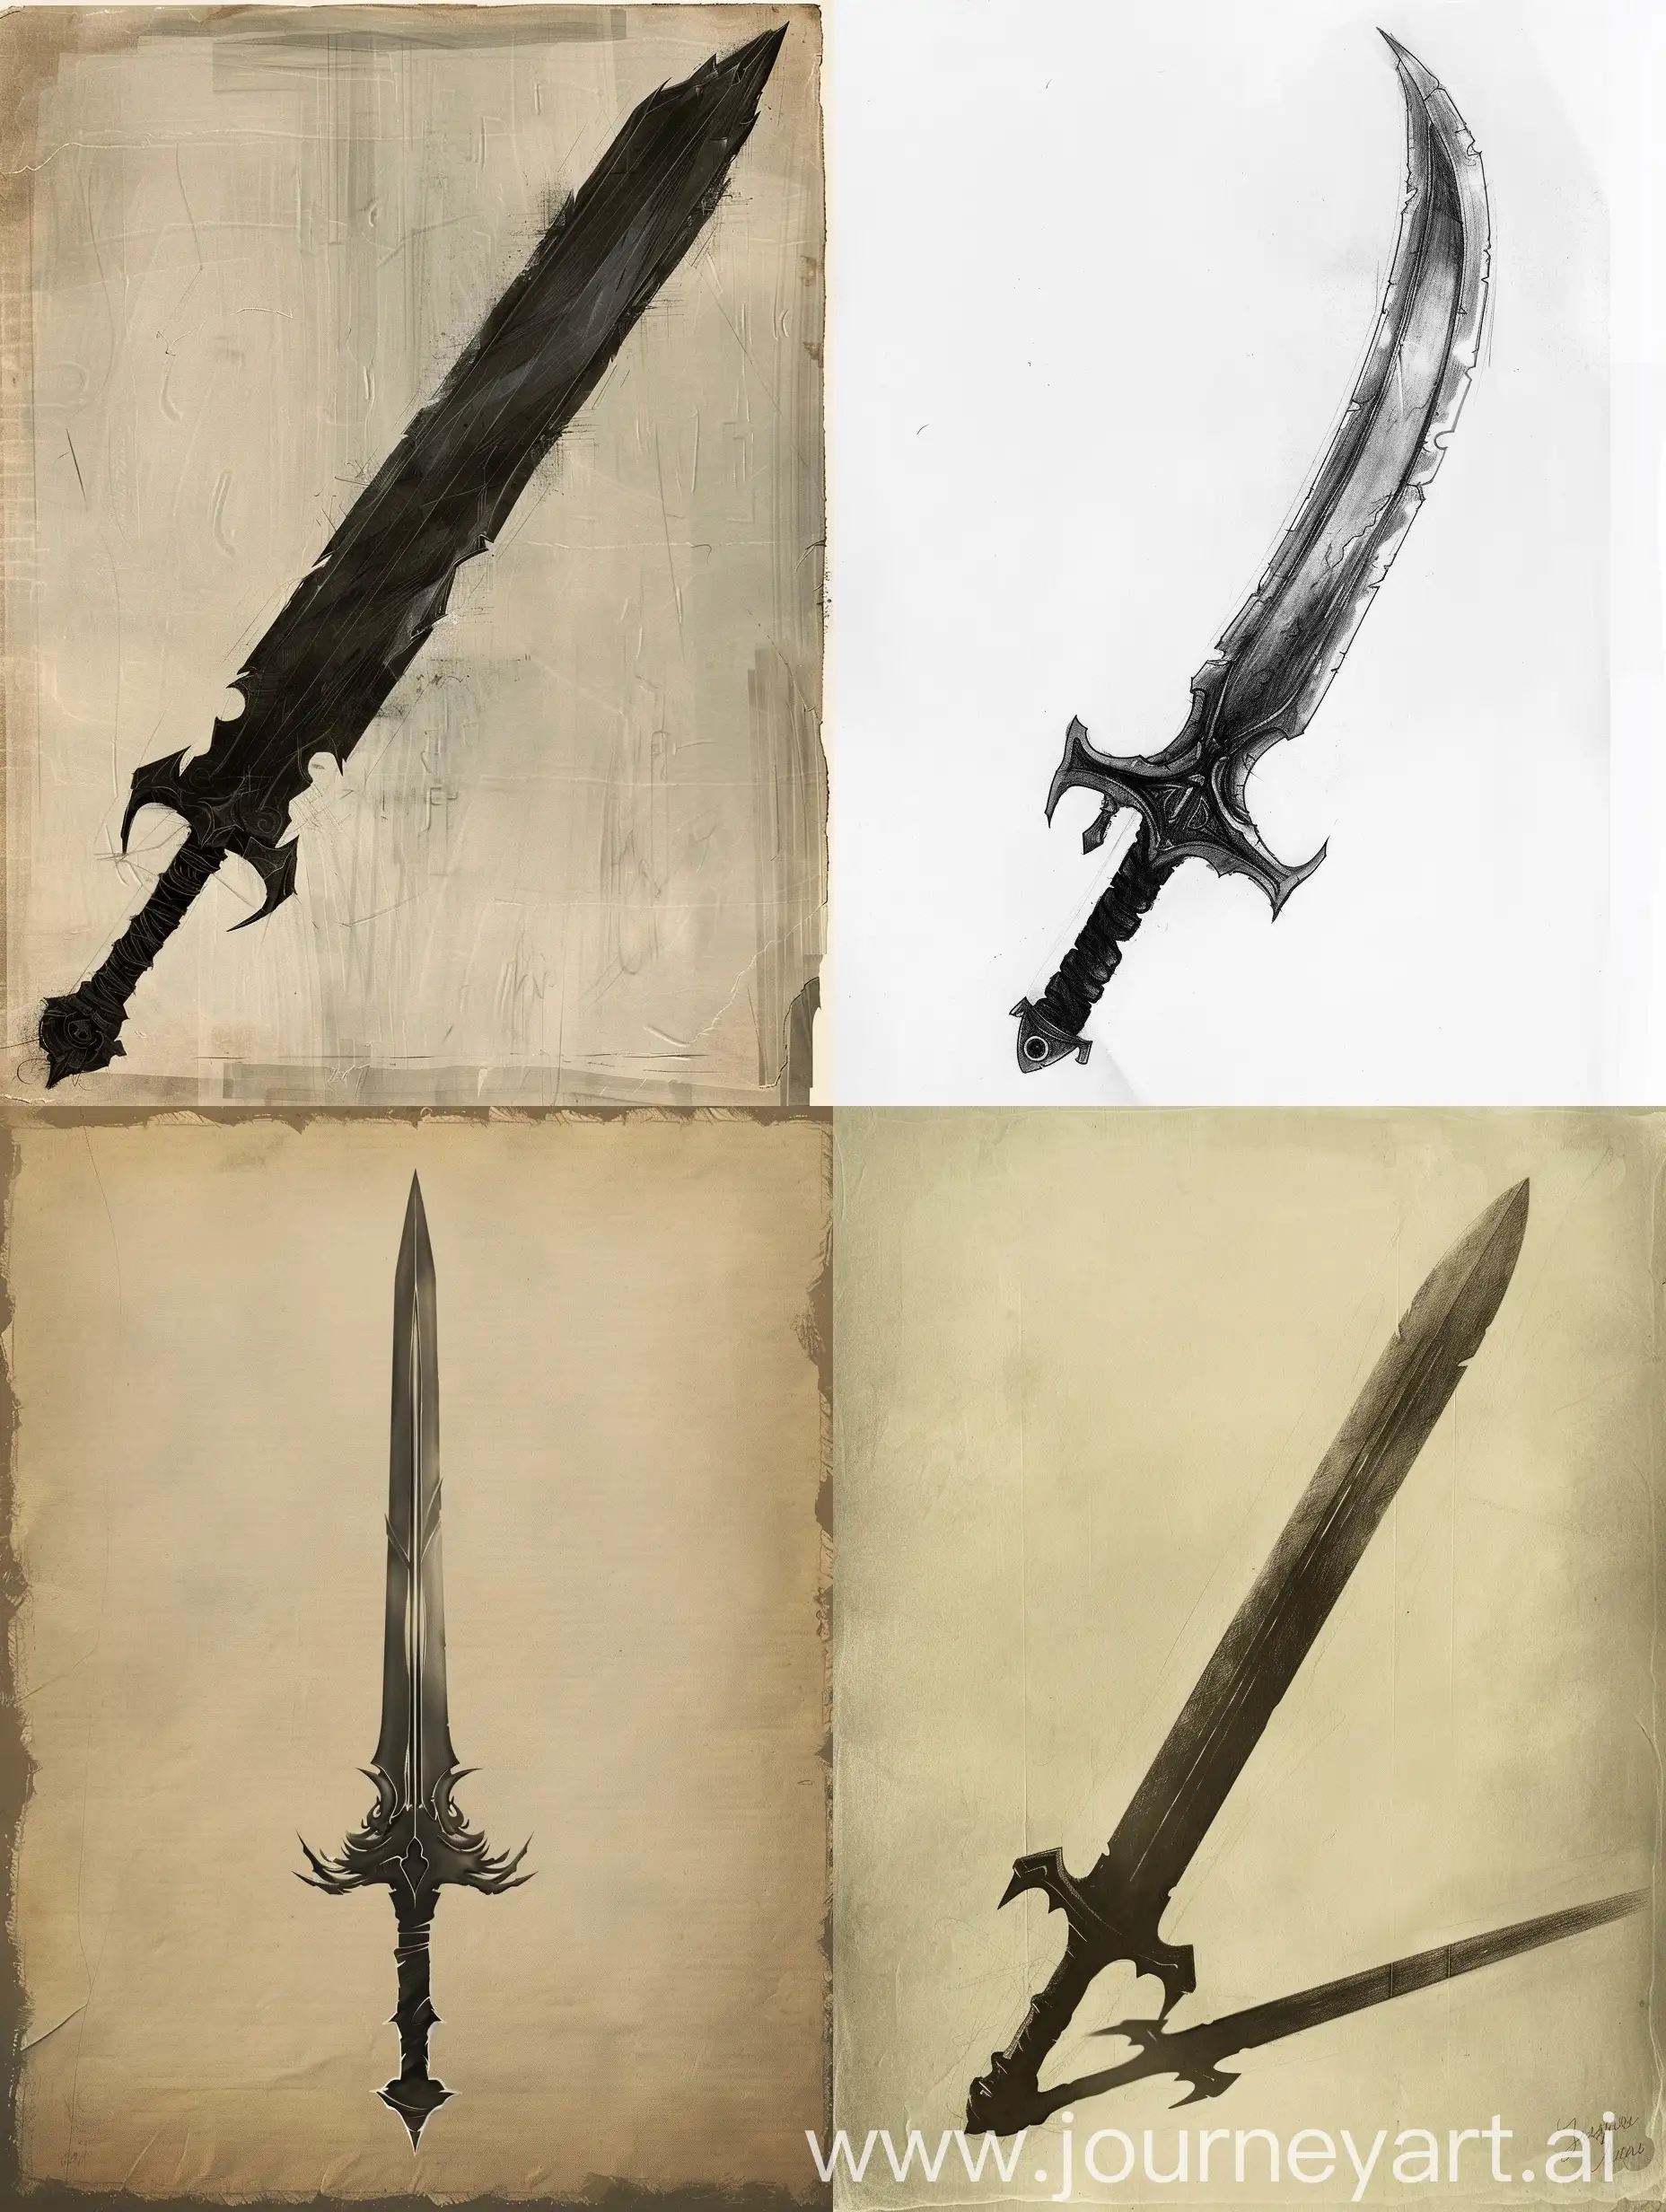 Weapon design sketch of a sword, made of shadow

